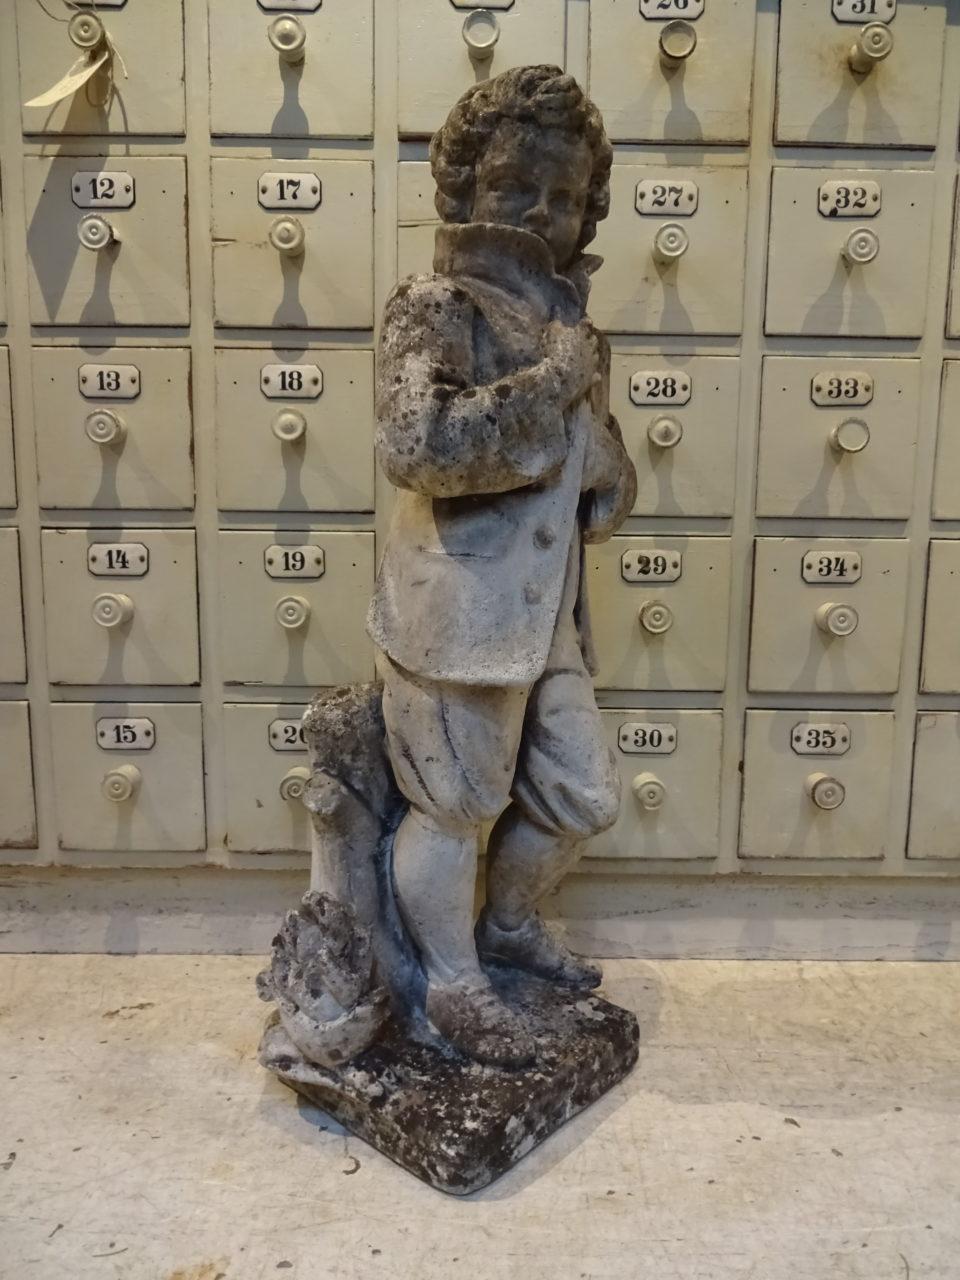 Romantic vintage French garden sandstone figure, from the South of France. Depicts a little boy hunched up and protecting himself from the rain. Lovely weathered patina from the elements.